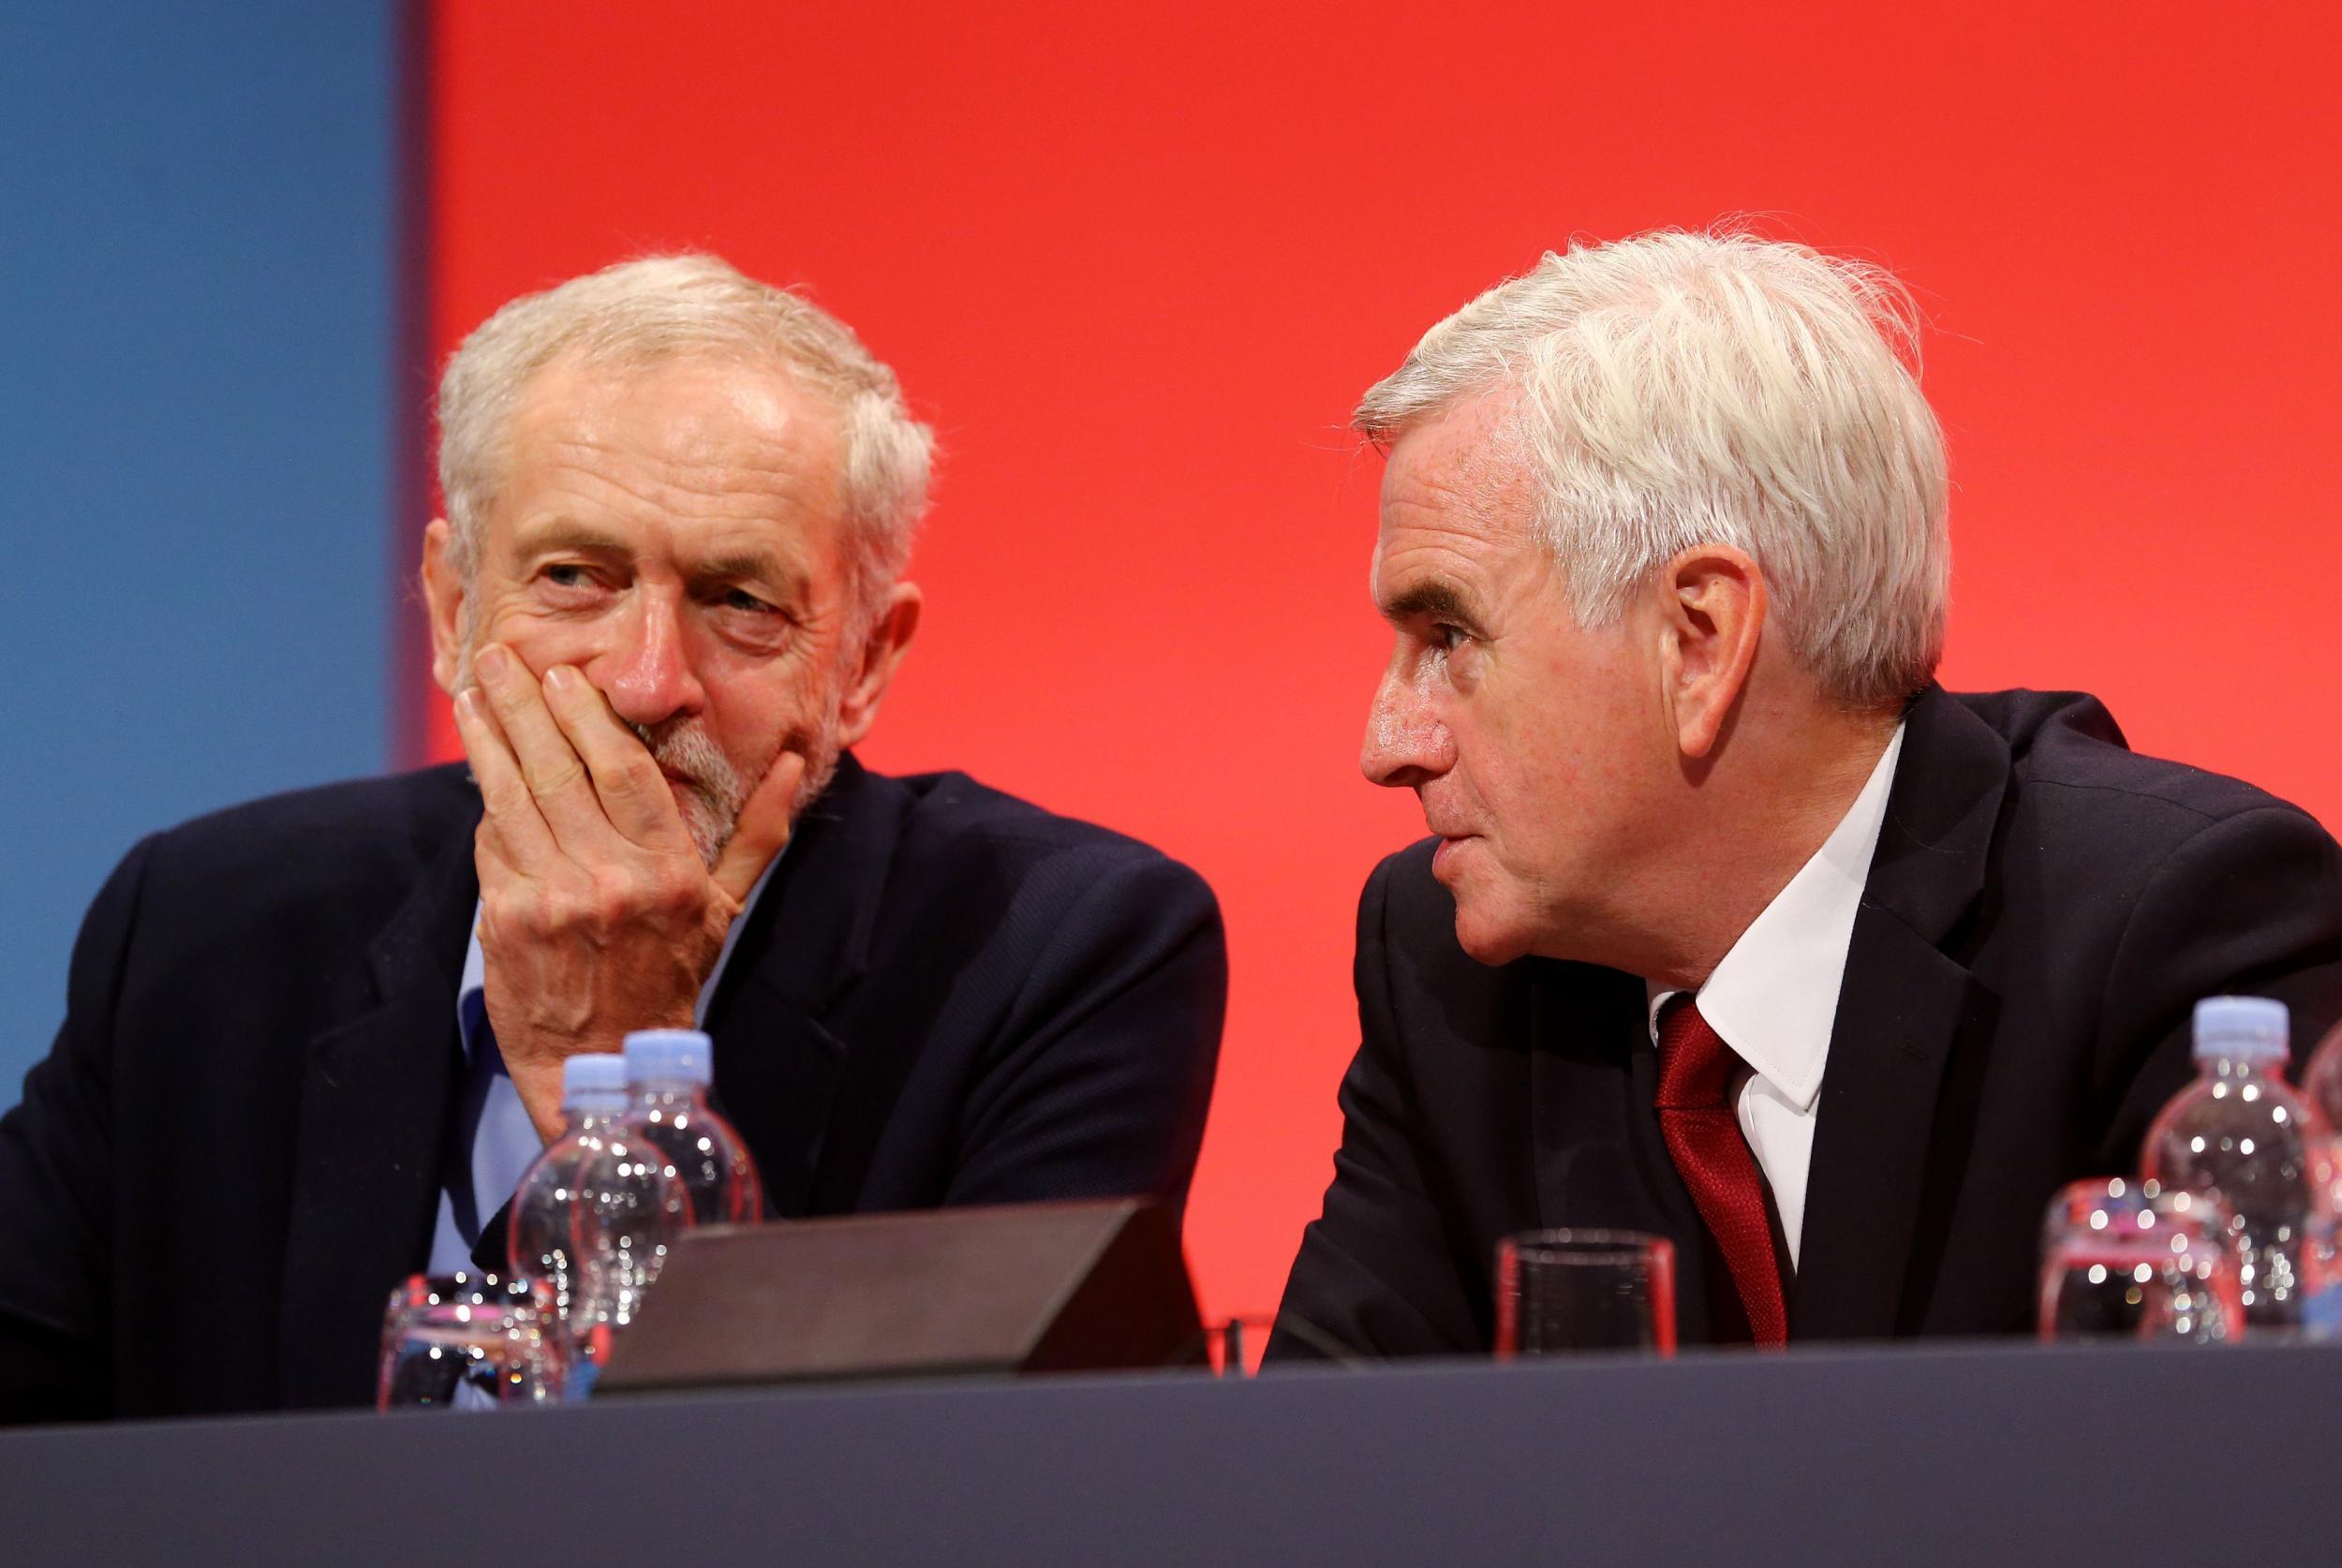 Jeremy Corbyn and John McDonnell, his Shadow Chancellor and close friend